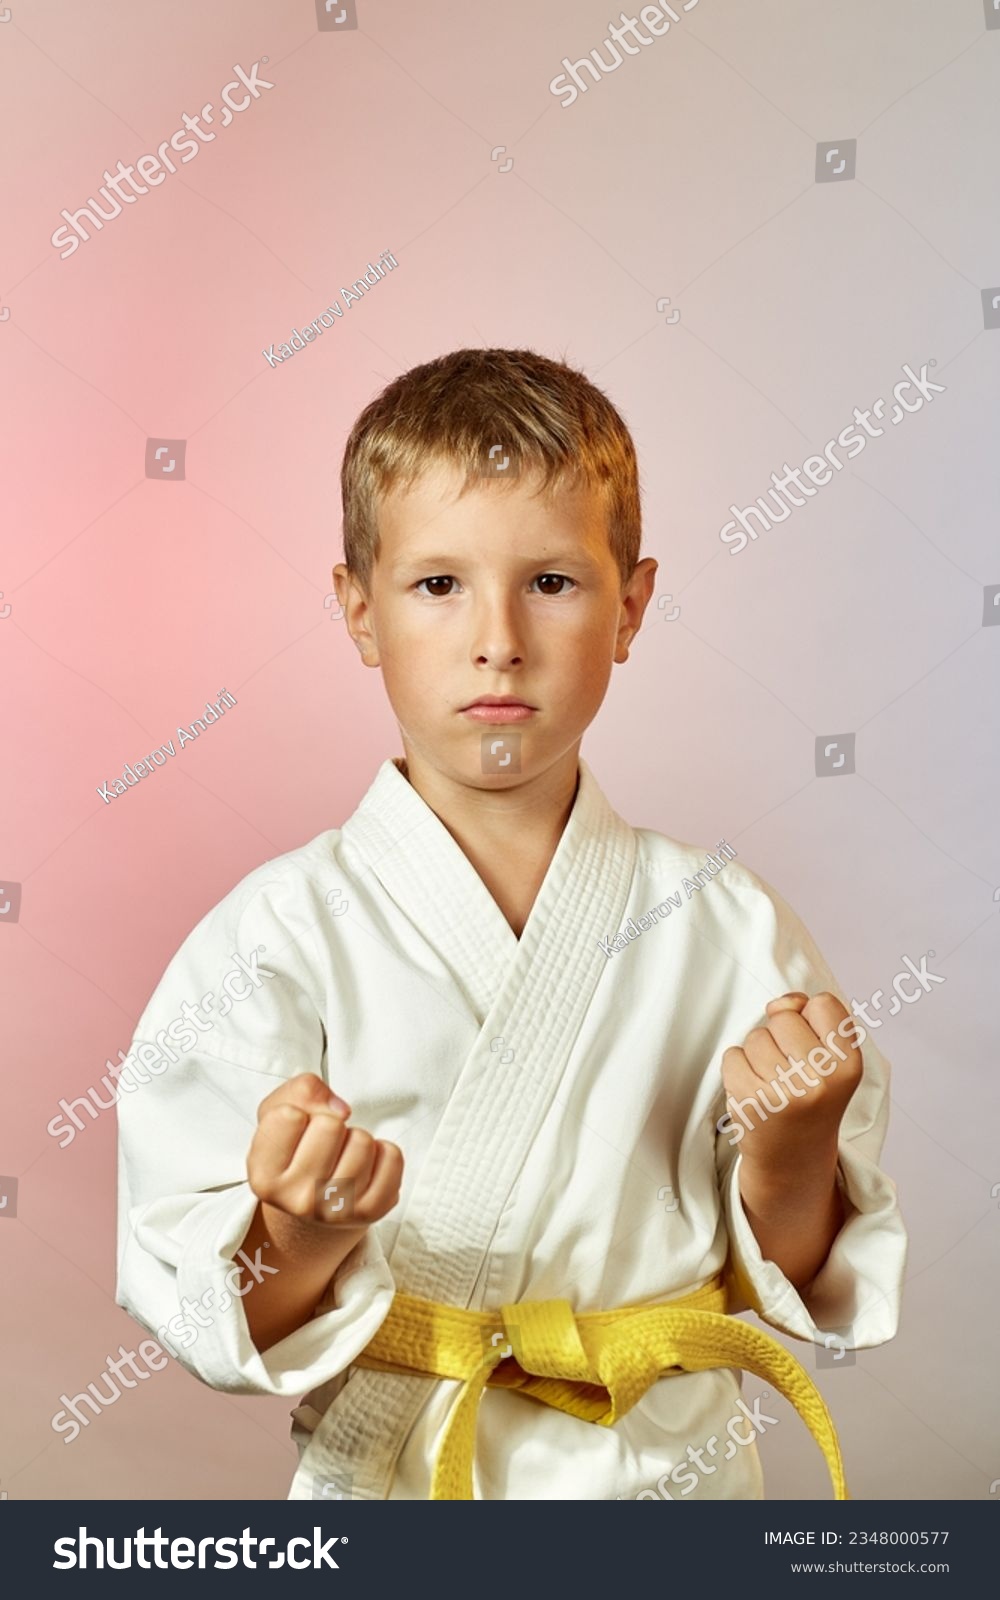 On a gradient colored background, a focused sportsman in karategi #2348000577